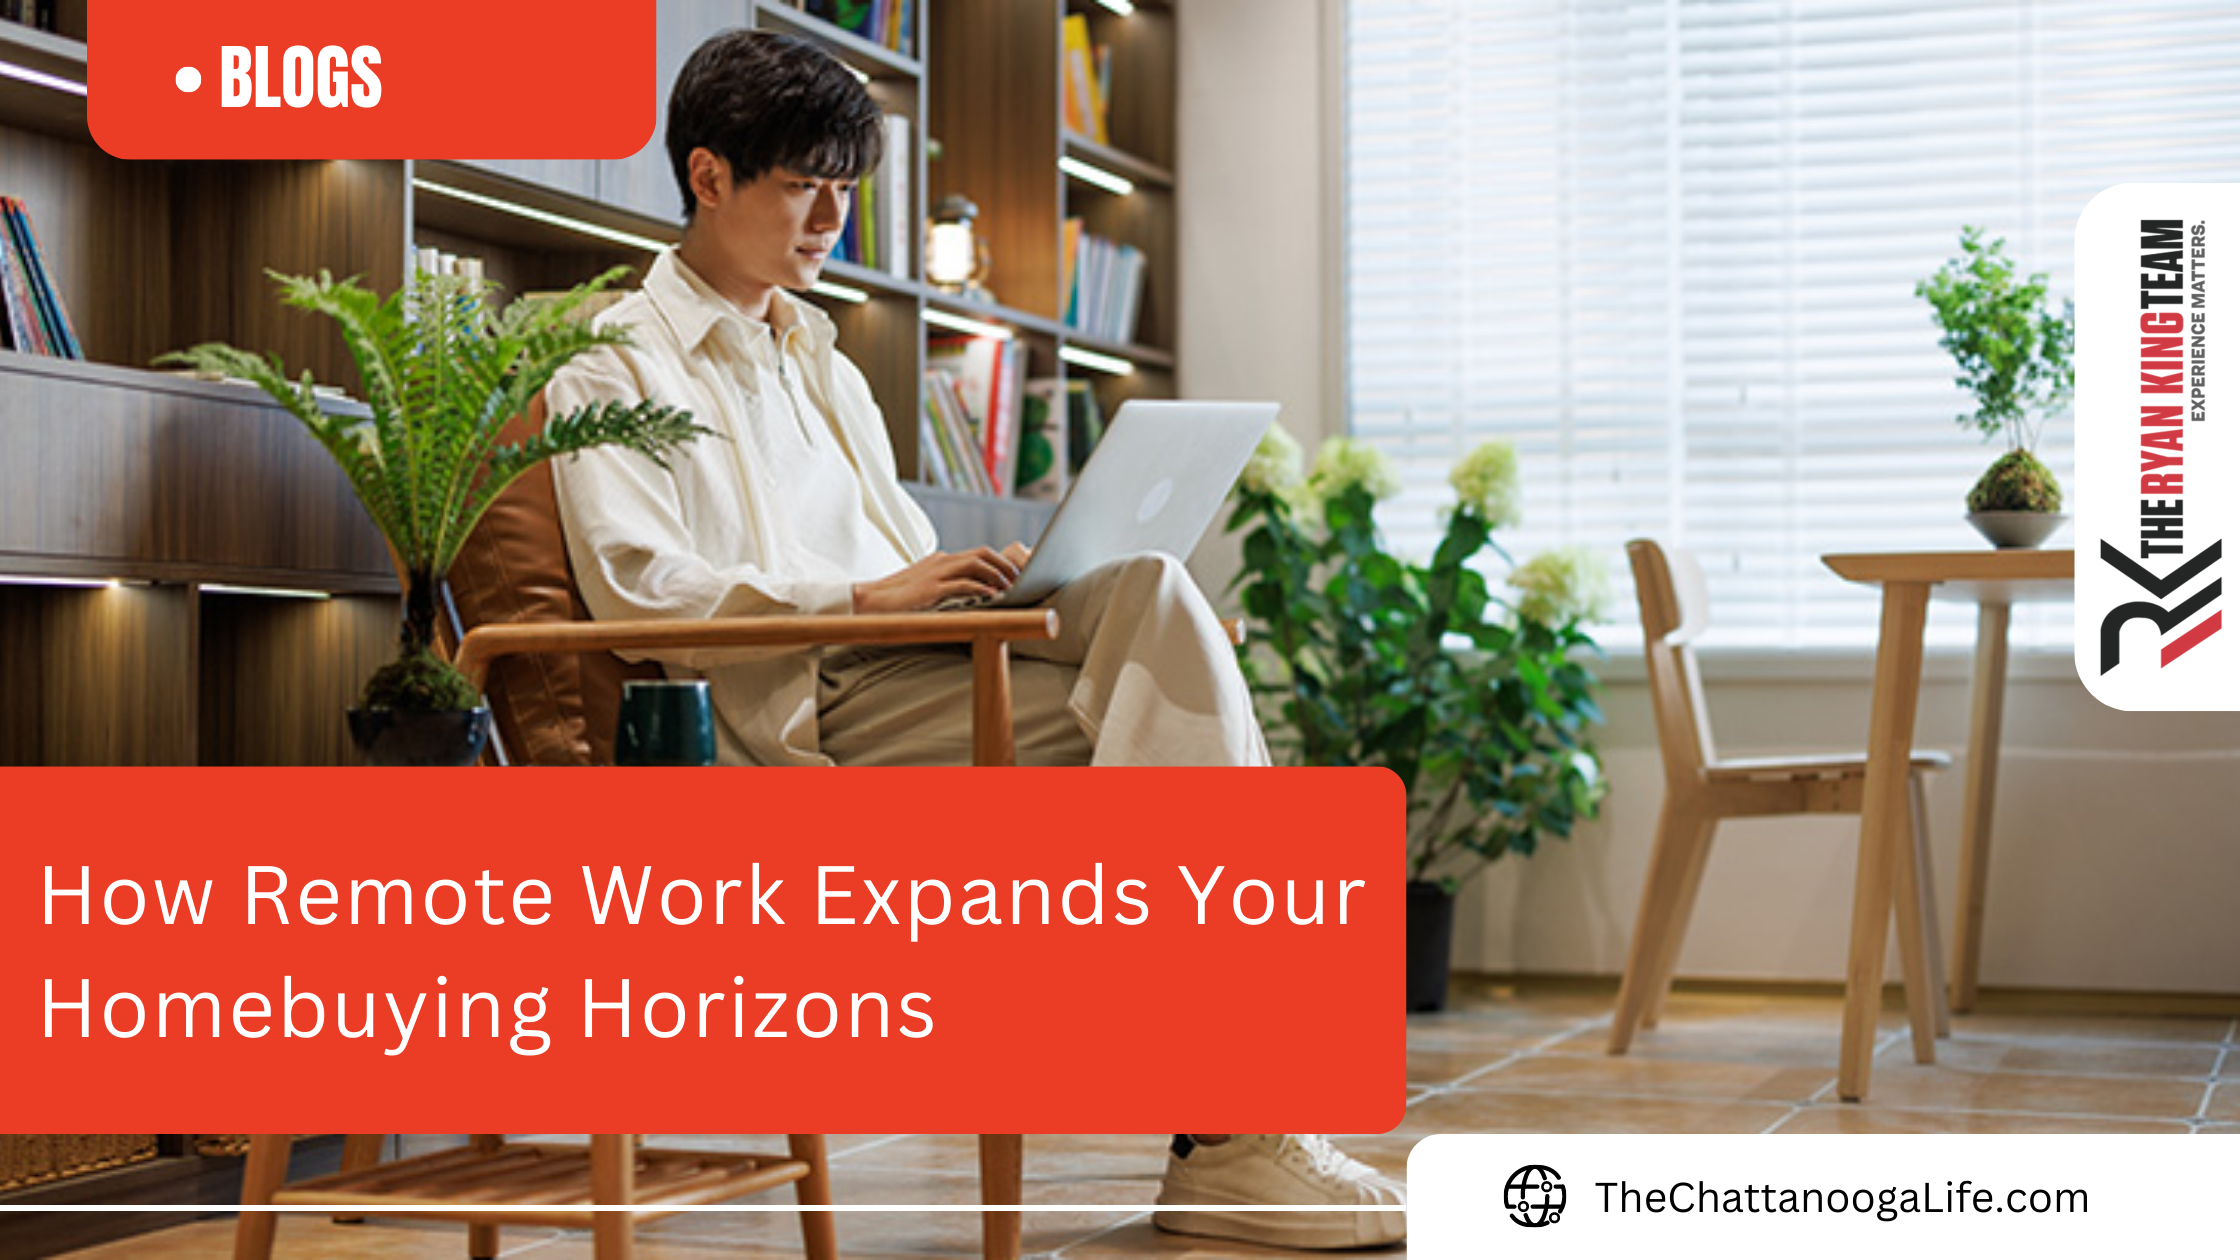 How remote work expands your homebuying horizons